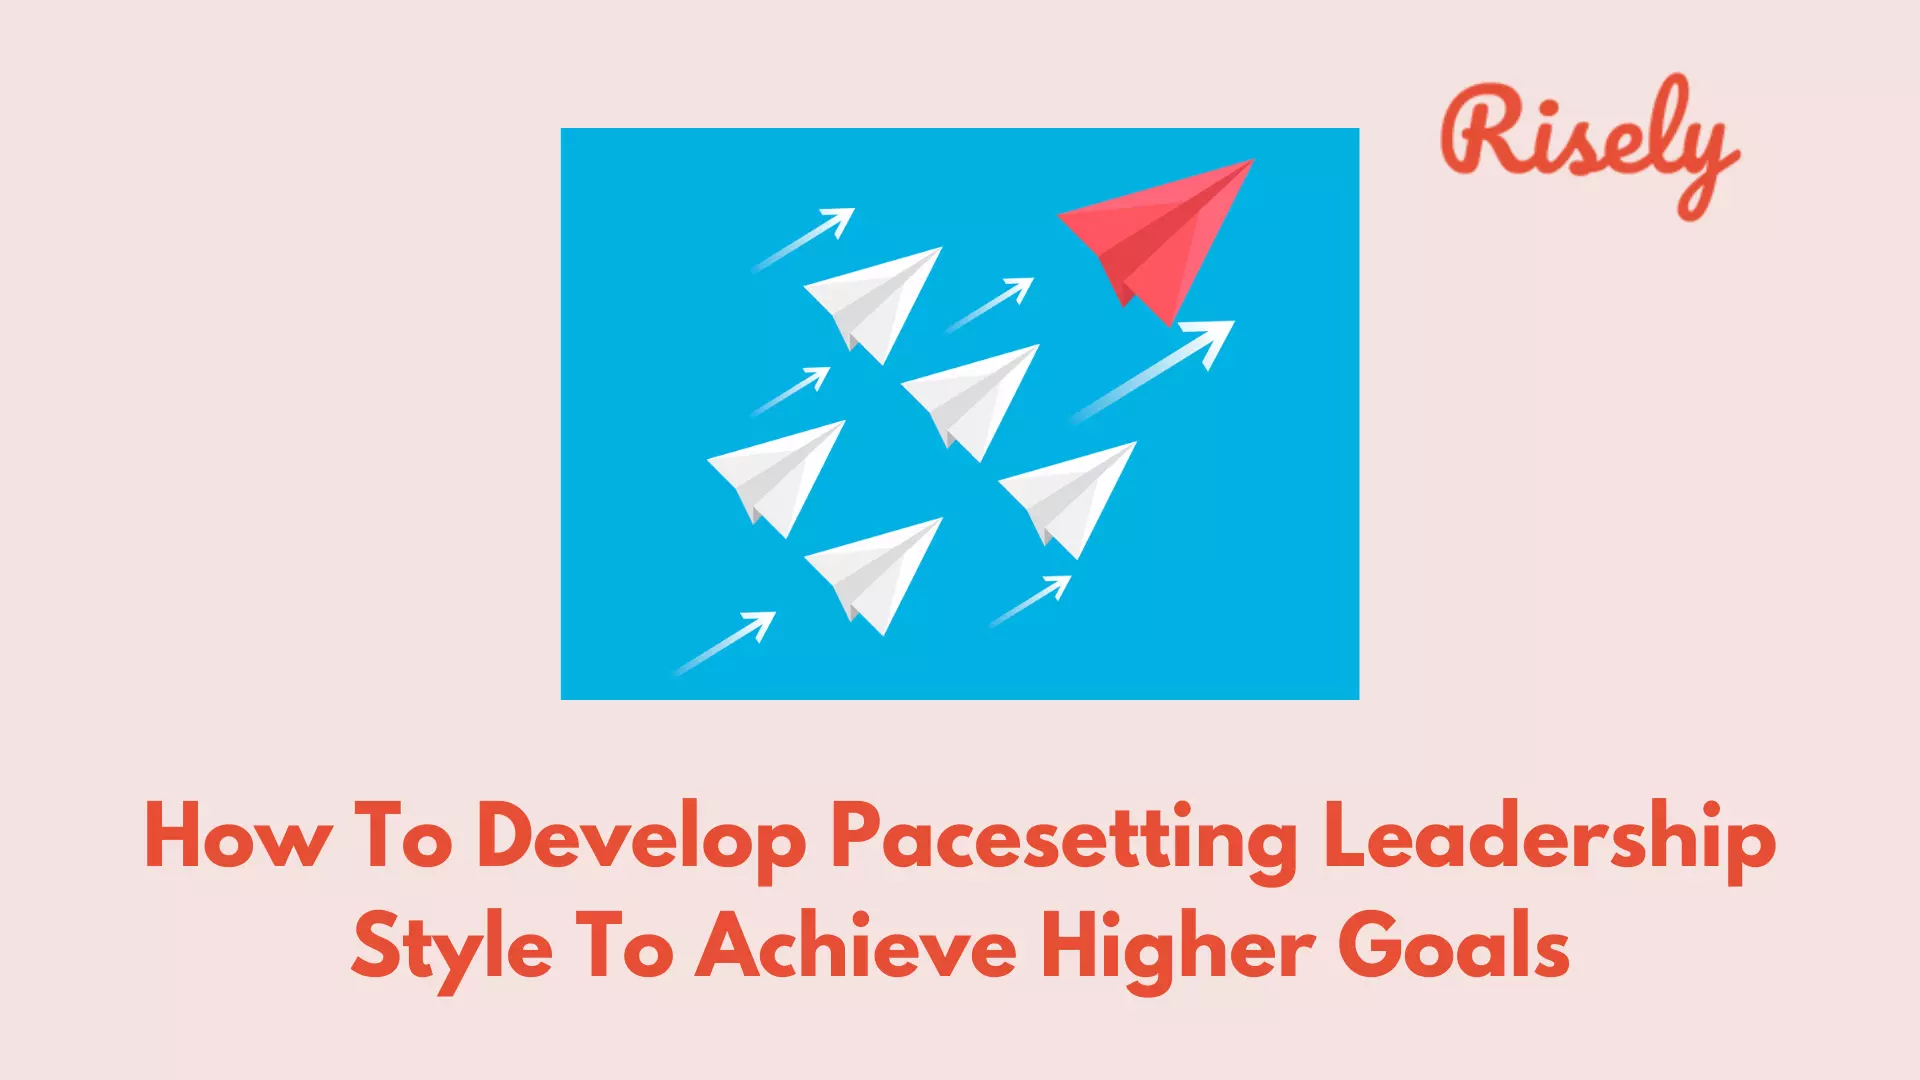 How To Develop Pacesetting Leadership Style To Achieve Higher Goals